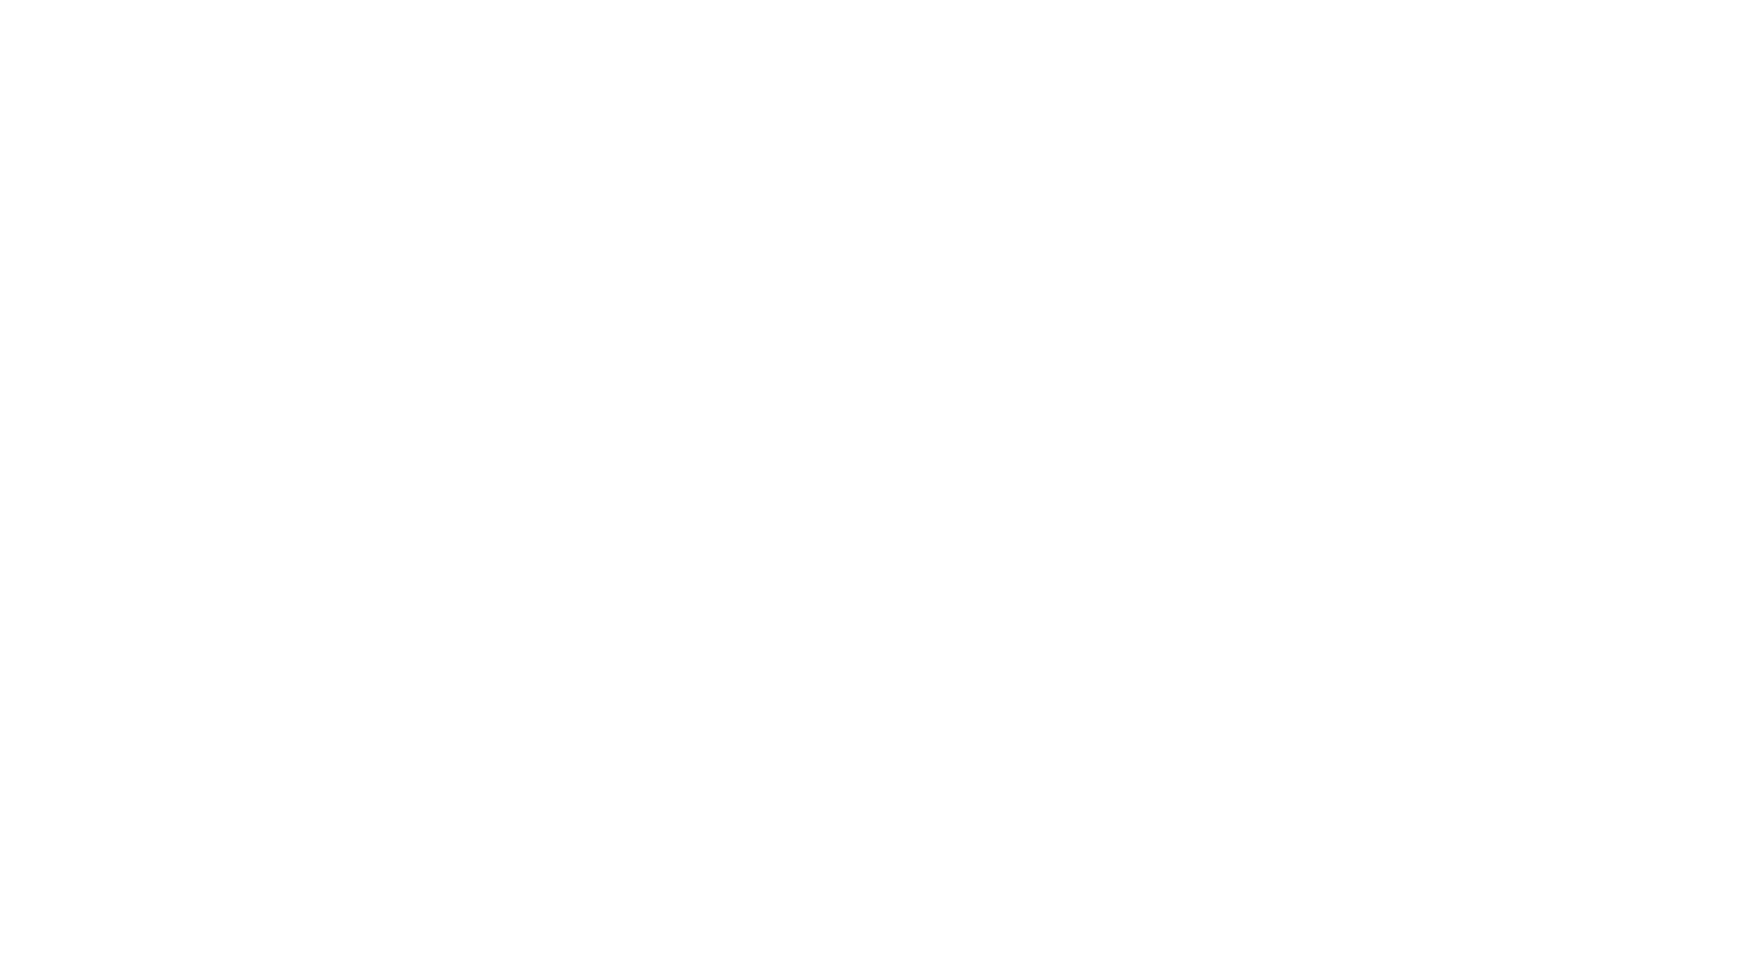 bettys the pink store